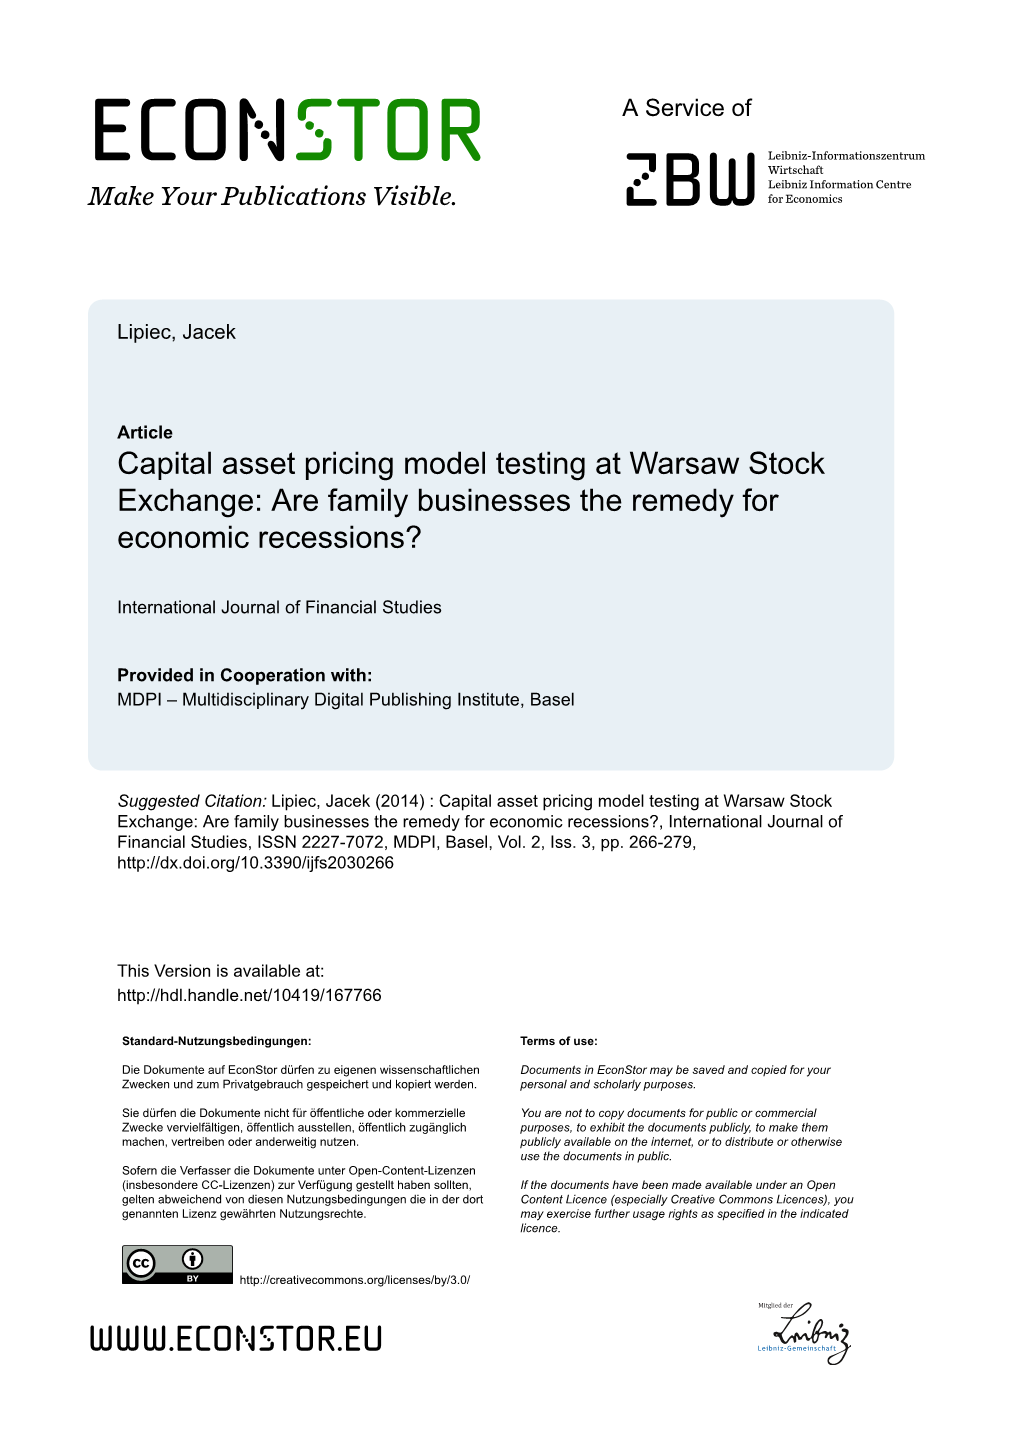 Capital Asset Pricing Model Testing at Warsaw Stock Exchange: Are Family Businesses the Remedy for Economic Recessions?